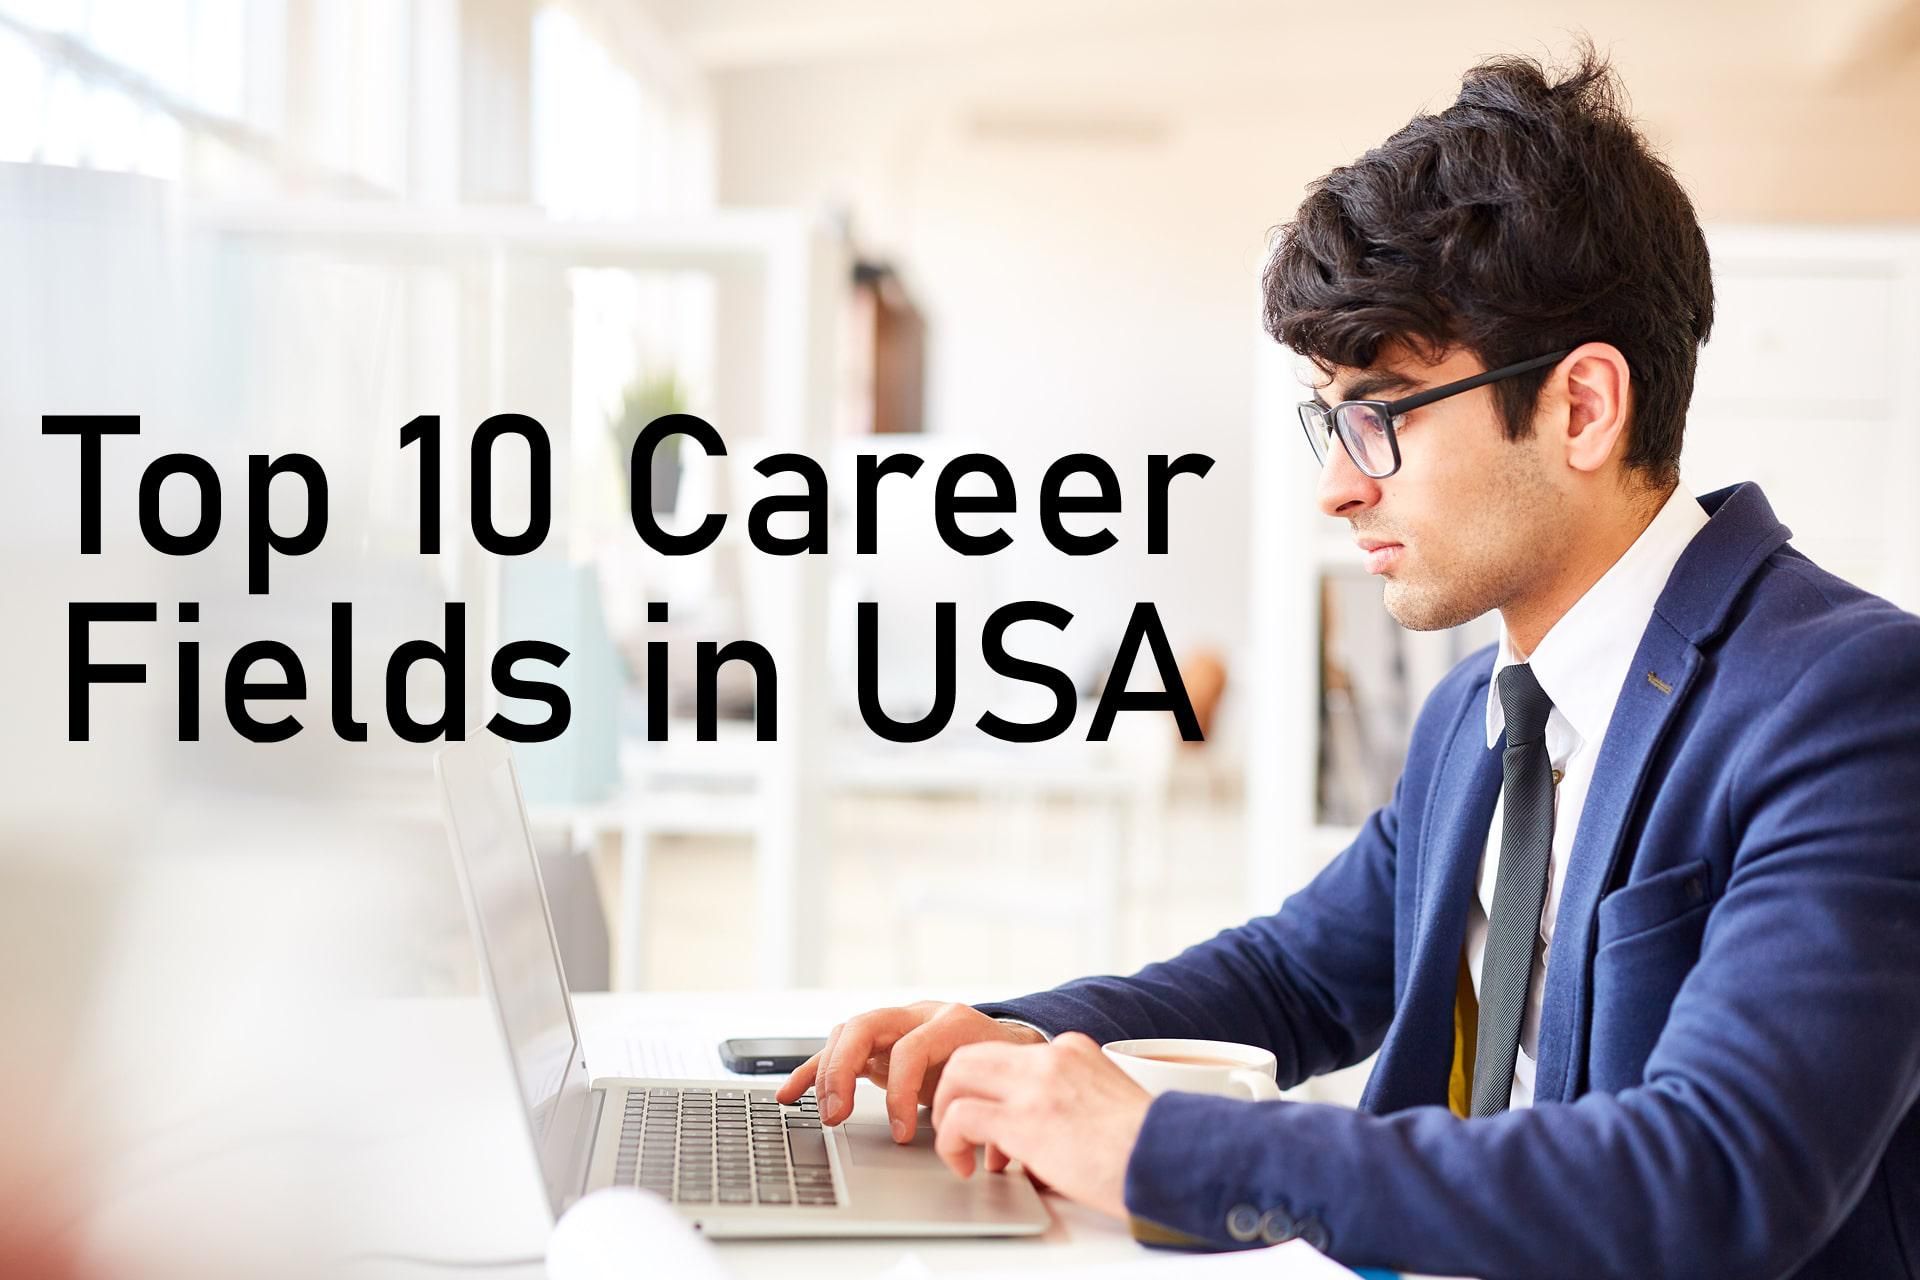 TOP 10 CAREER FIELDS IN USA